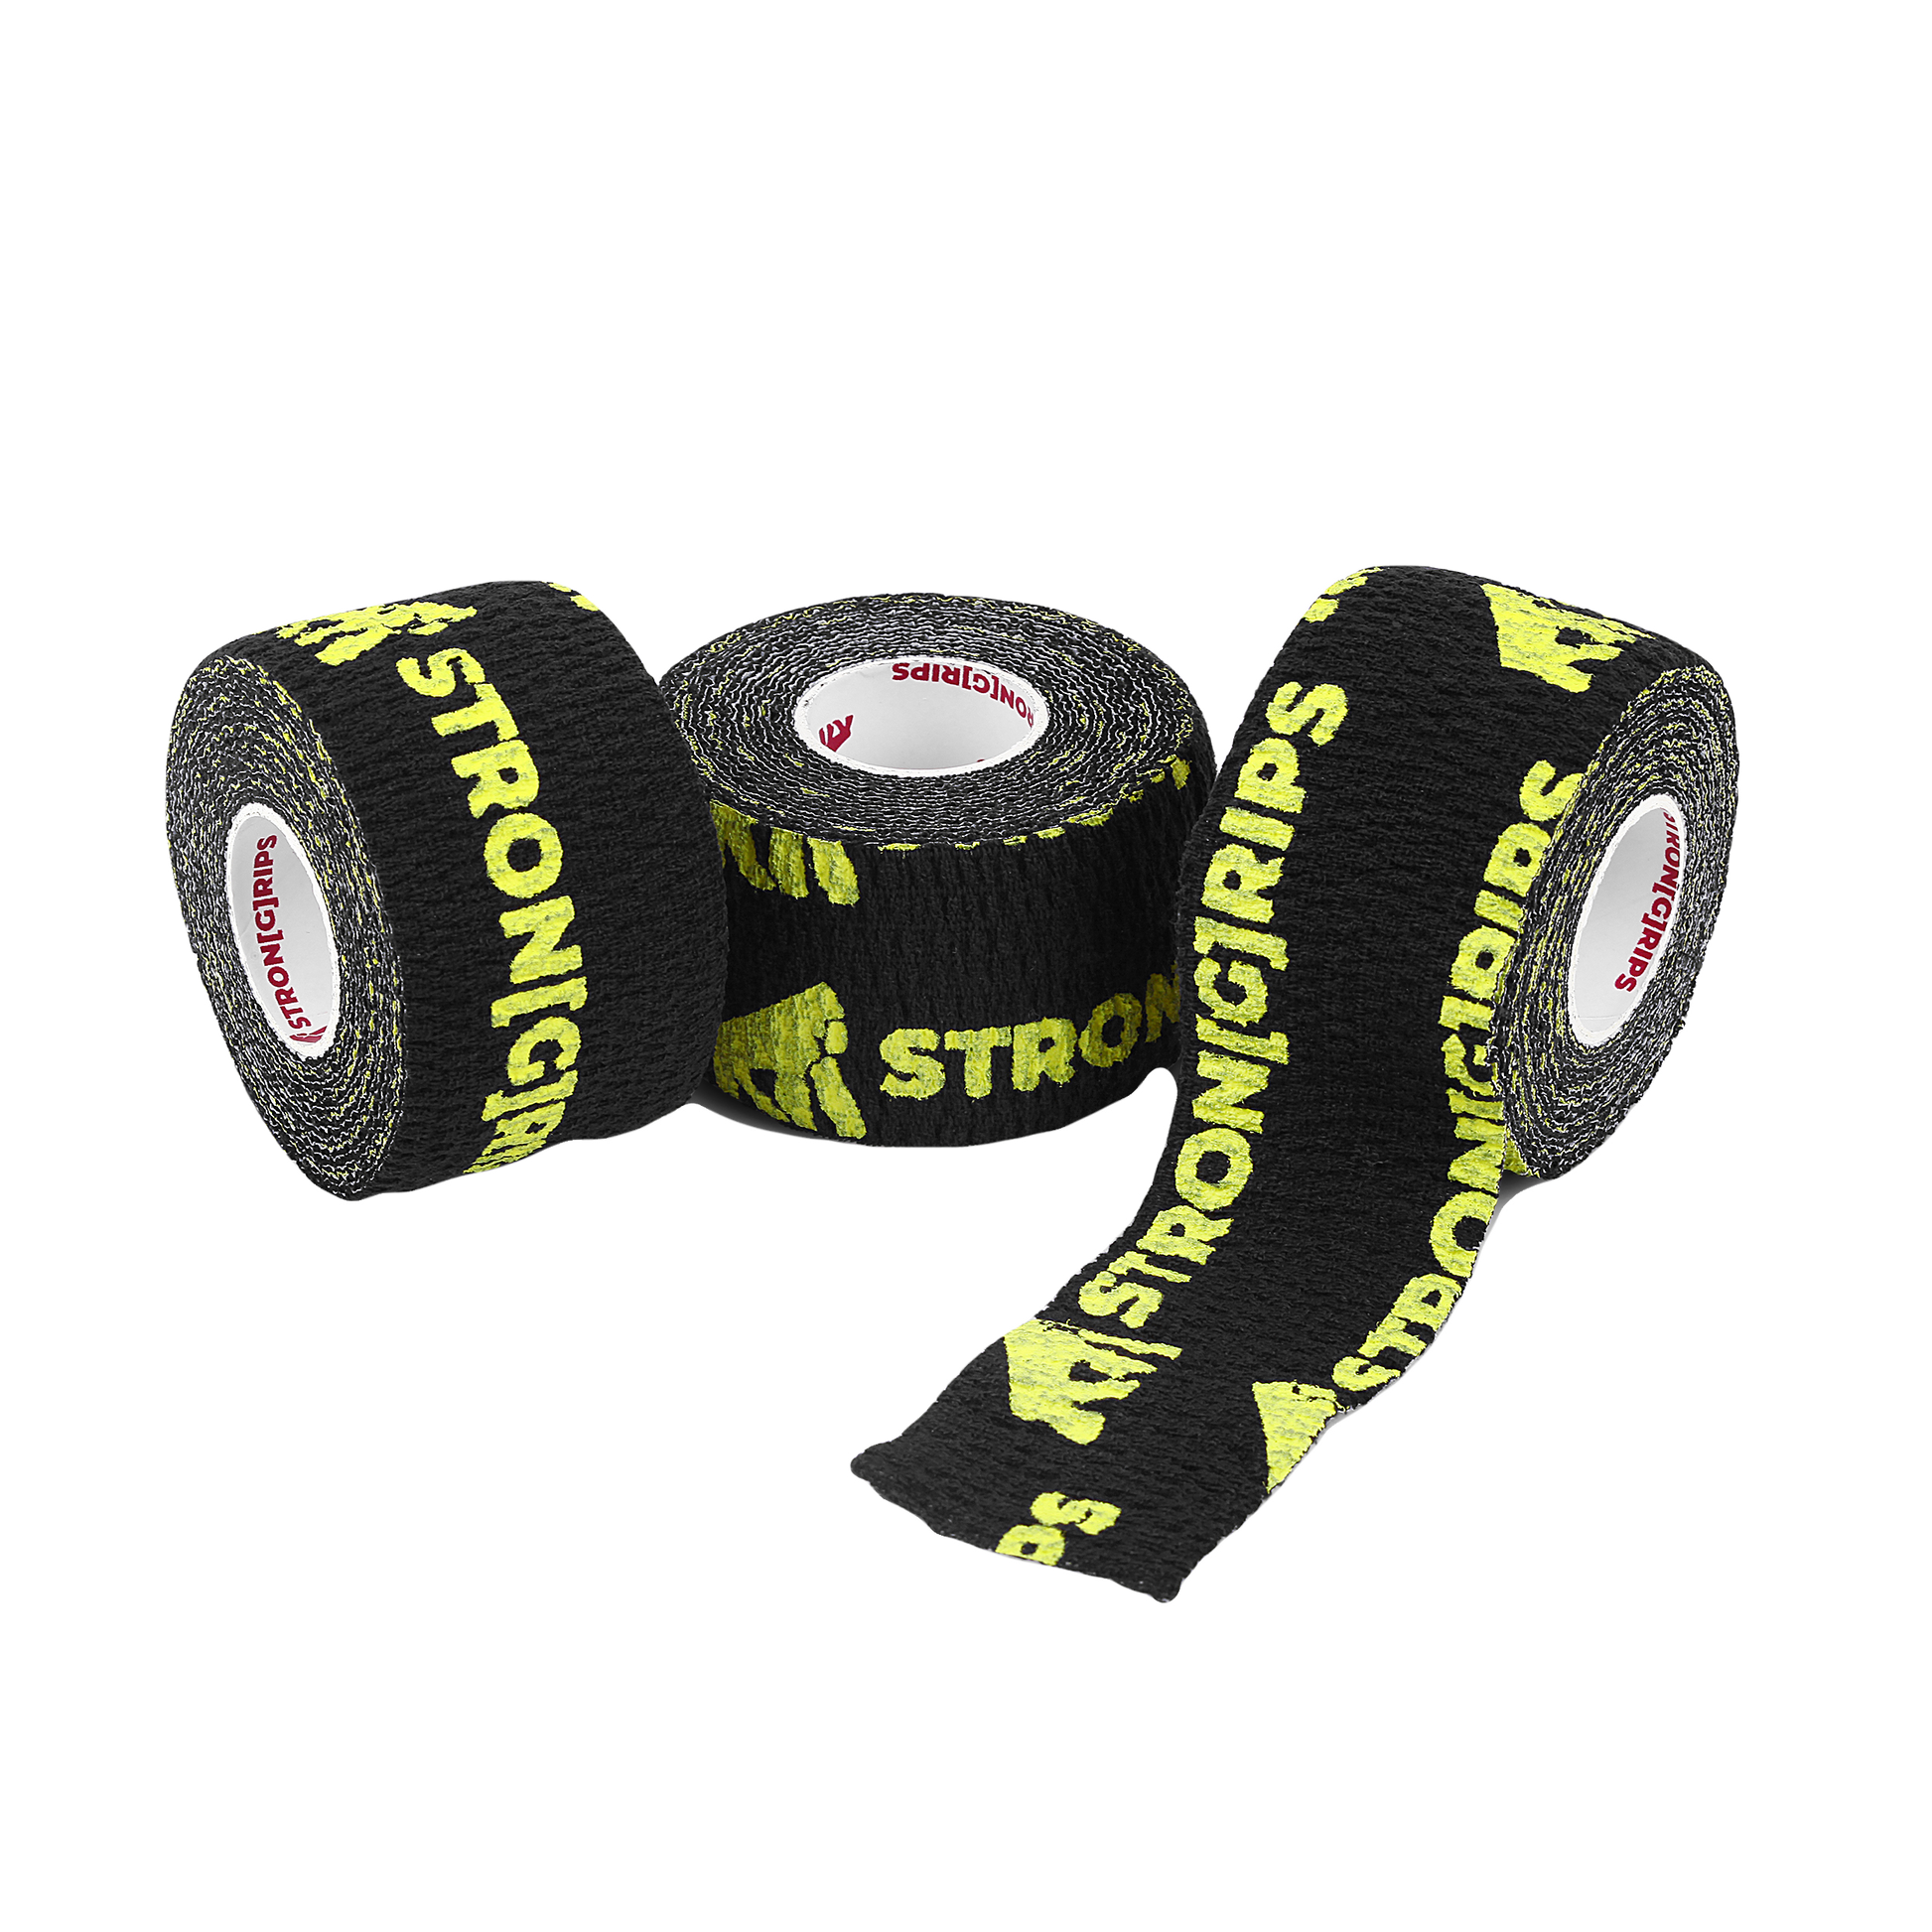 Weightlifting Thumb Tape – StronGrips